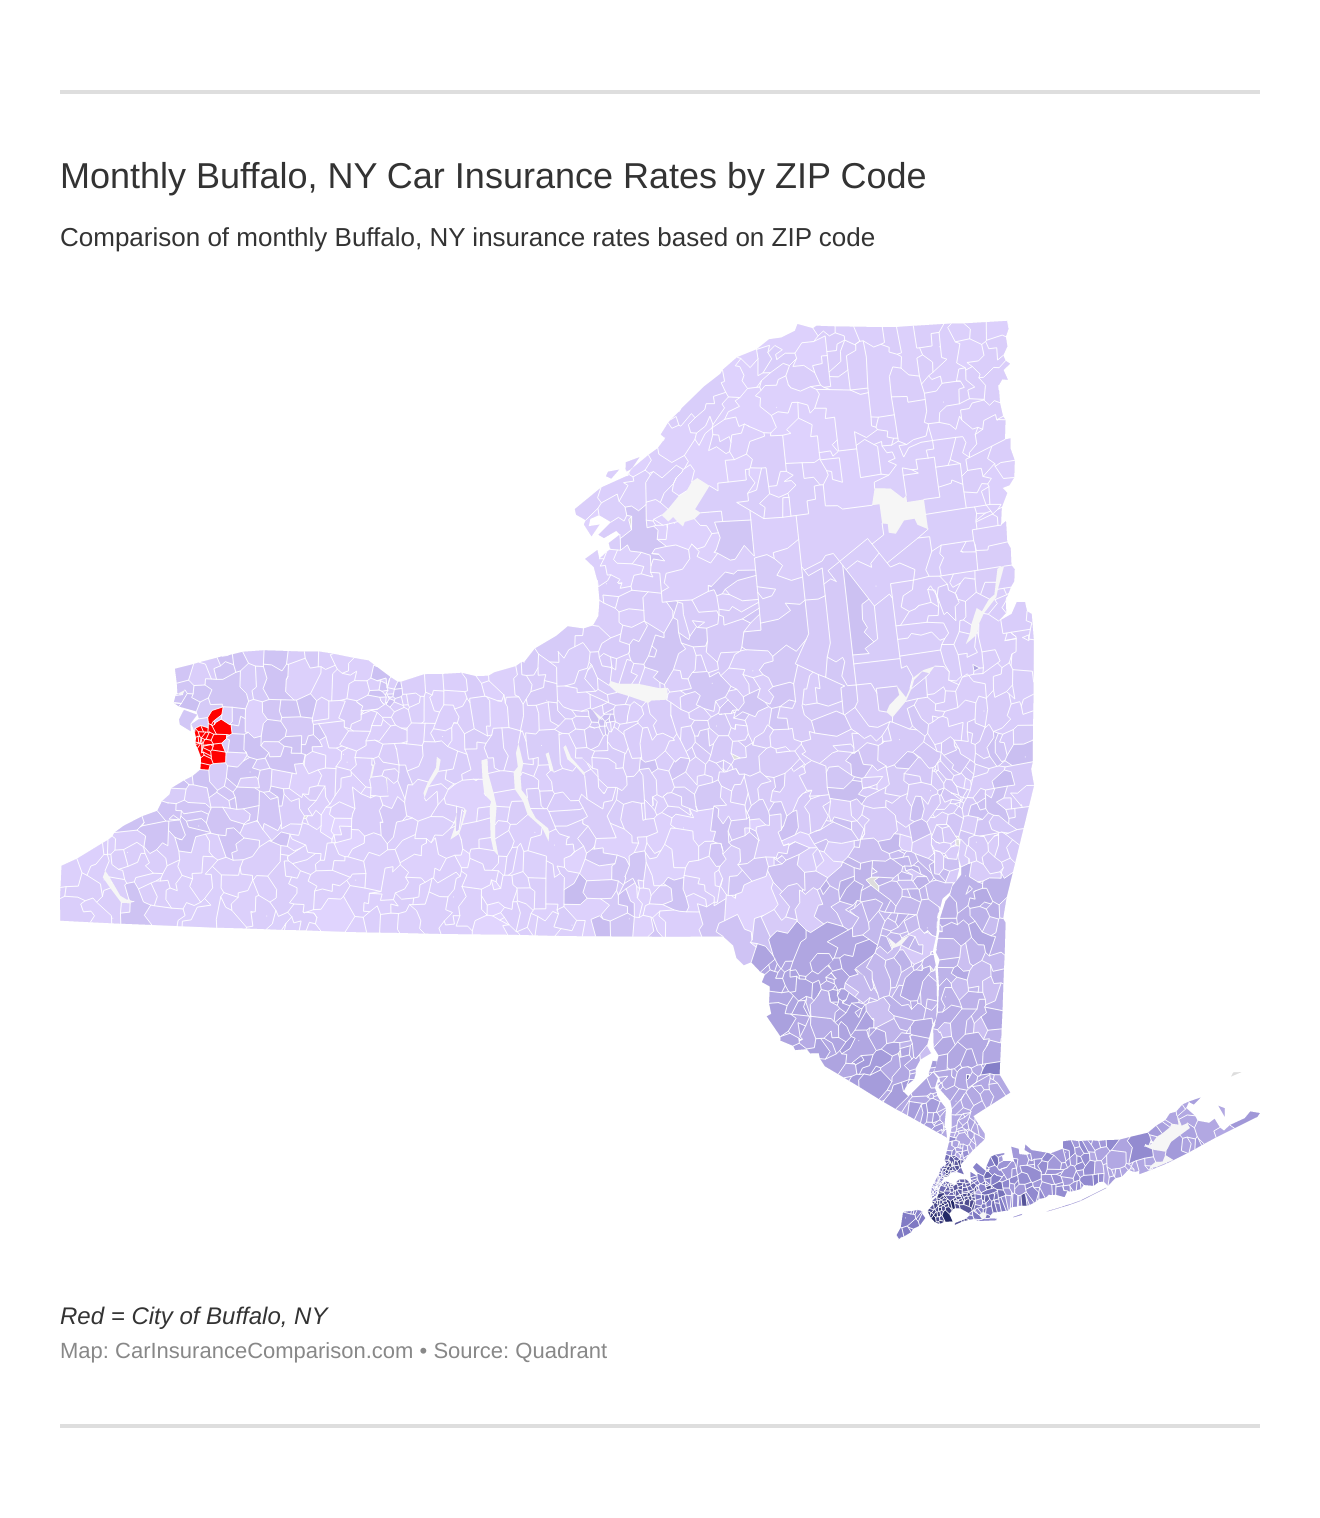 Monthly Buffalo, NY Car Insurance Rates by ZIP Code